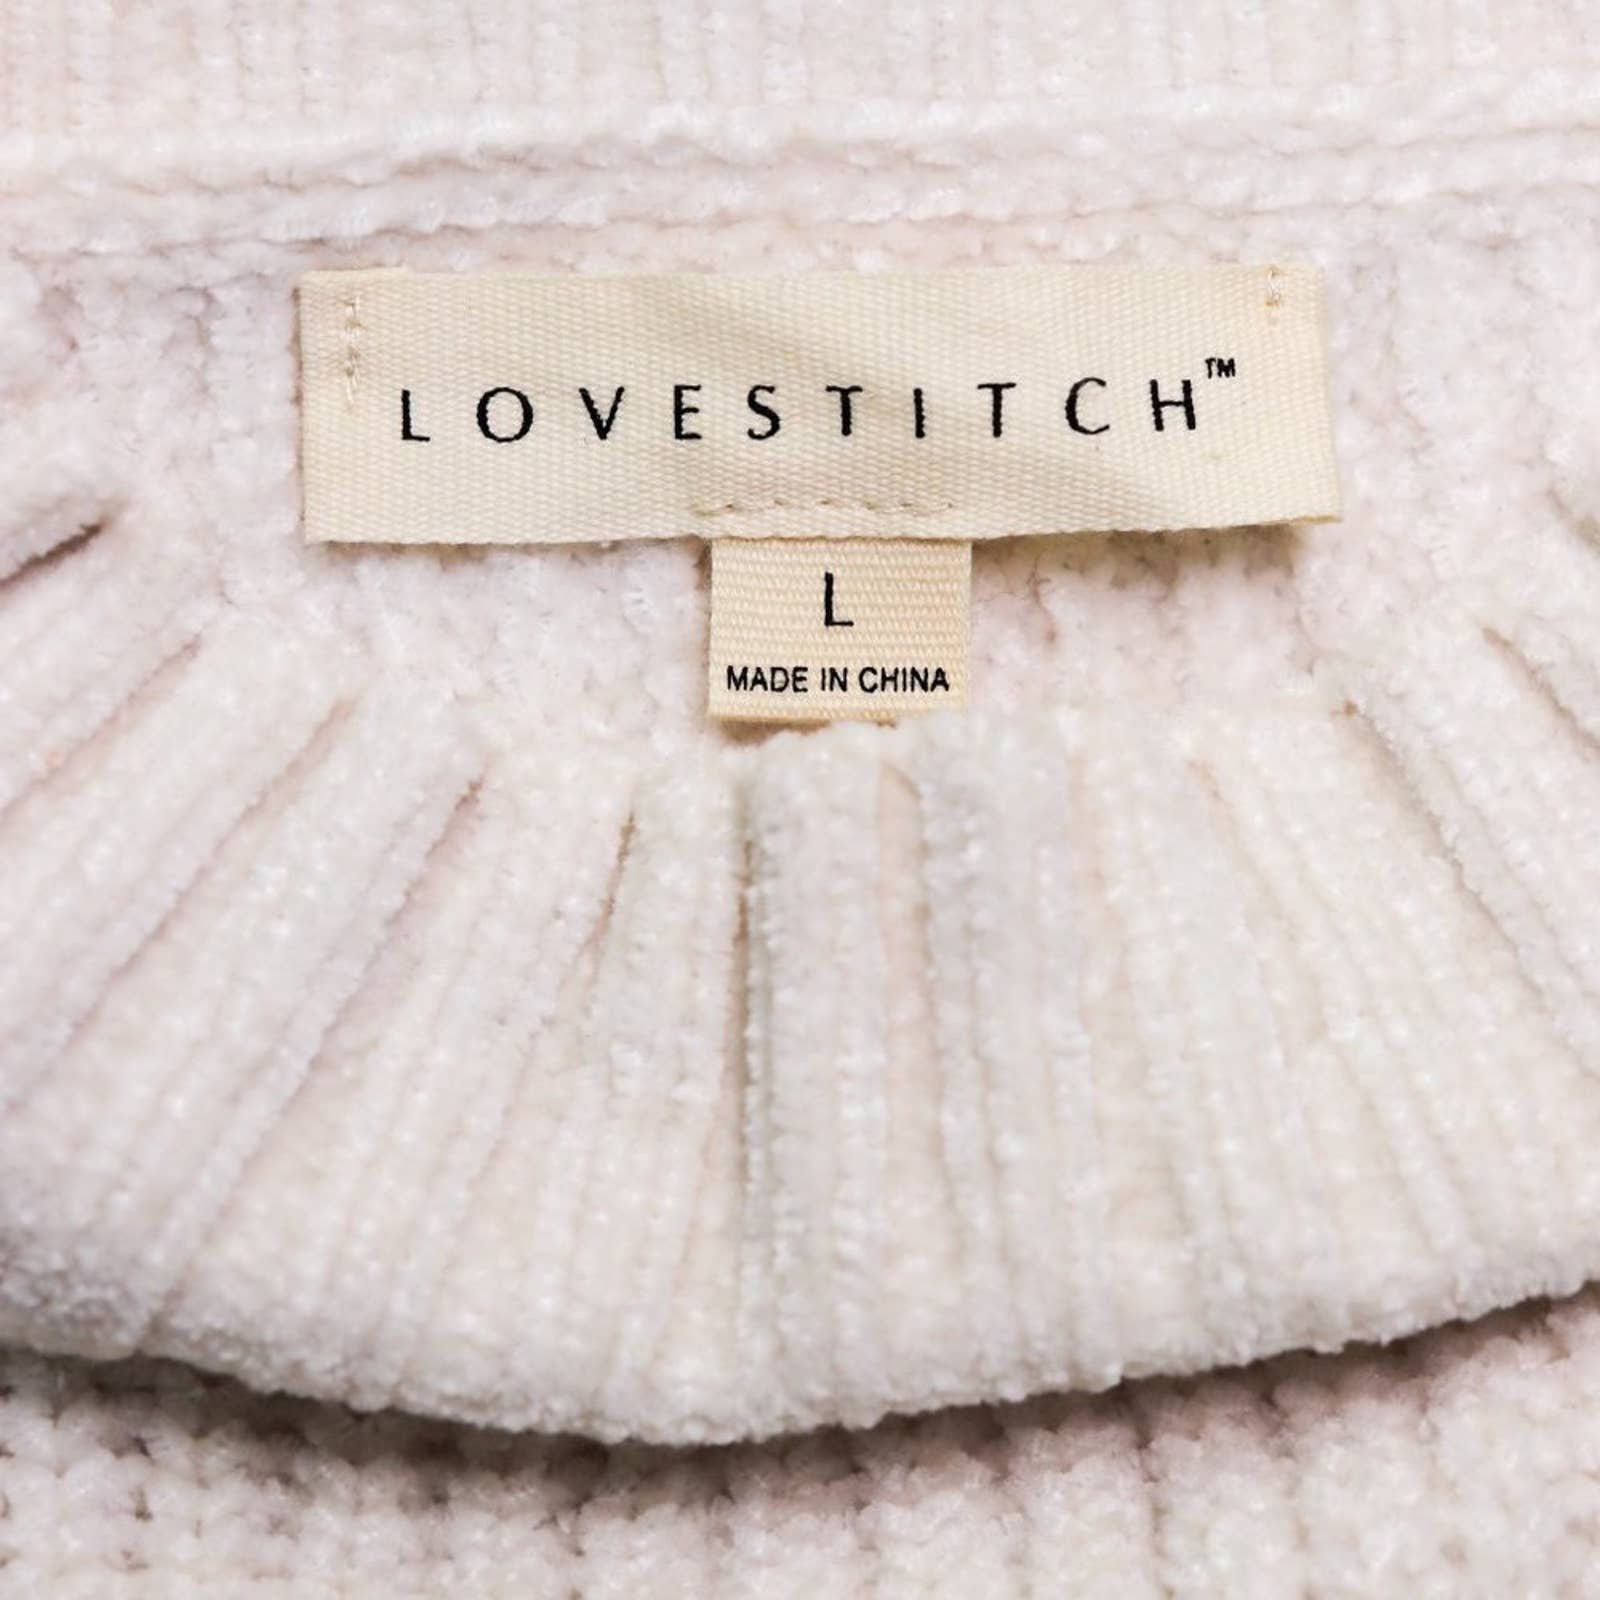 save up to 70% Lovestitch Quinn Chenille Cable Sweater Mock Balloon Sleeve Pullover White Large LgjZ2bWvn on sale